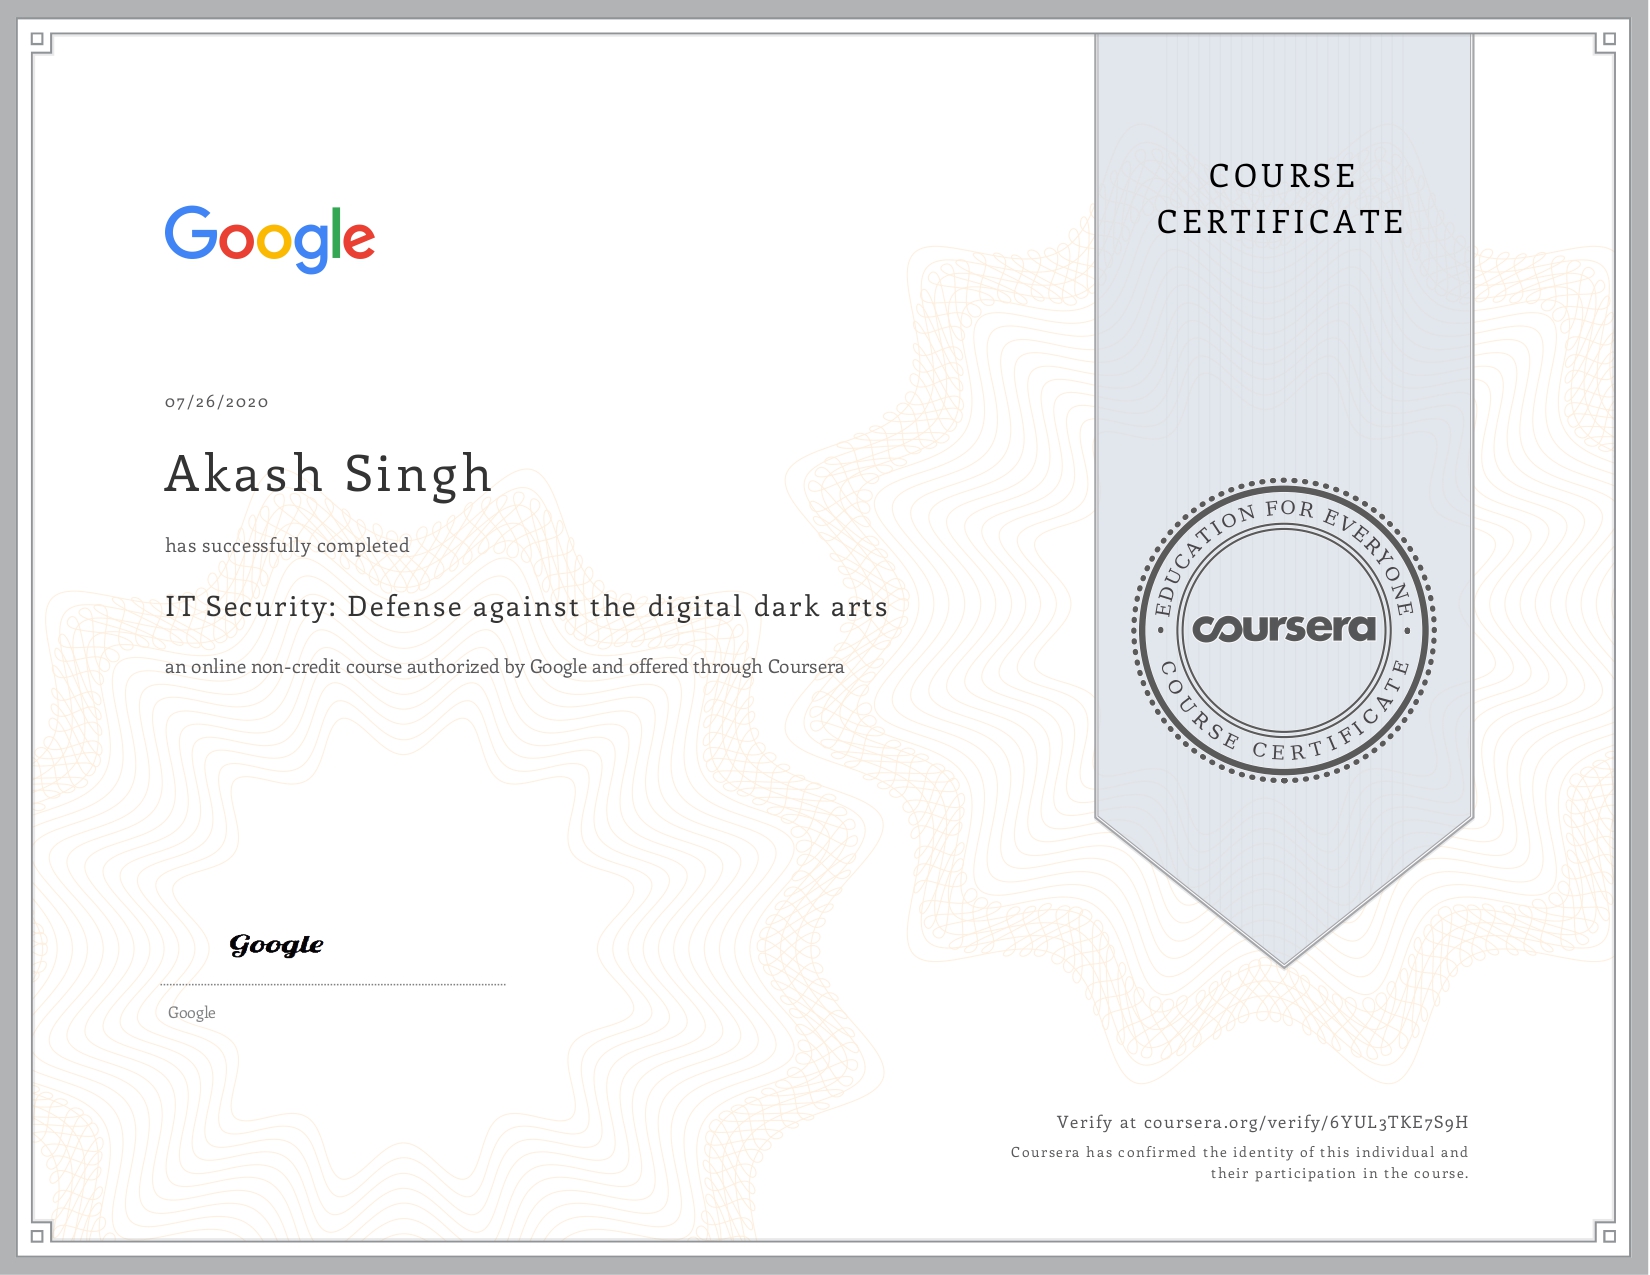 ' Coursera Certifications '_pages-to-jpg-0014.jpg